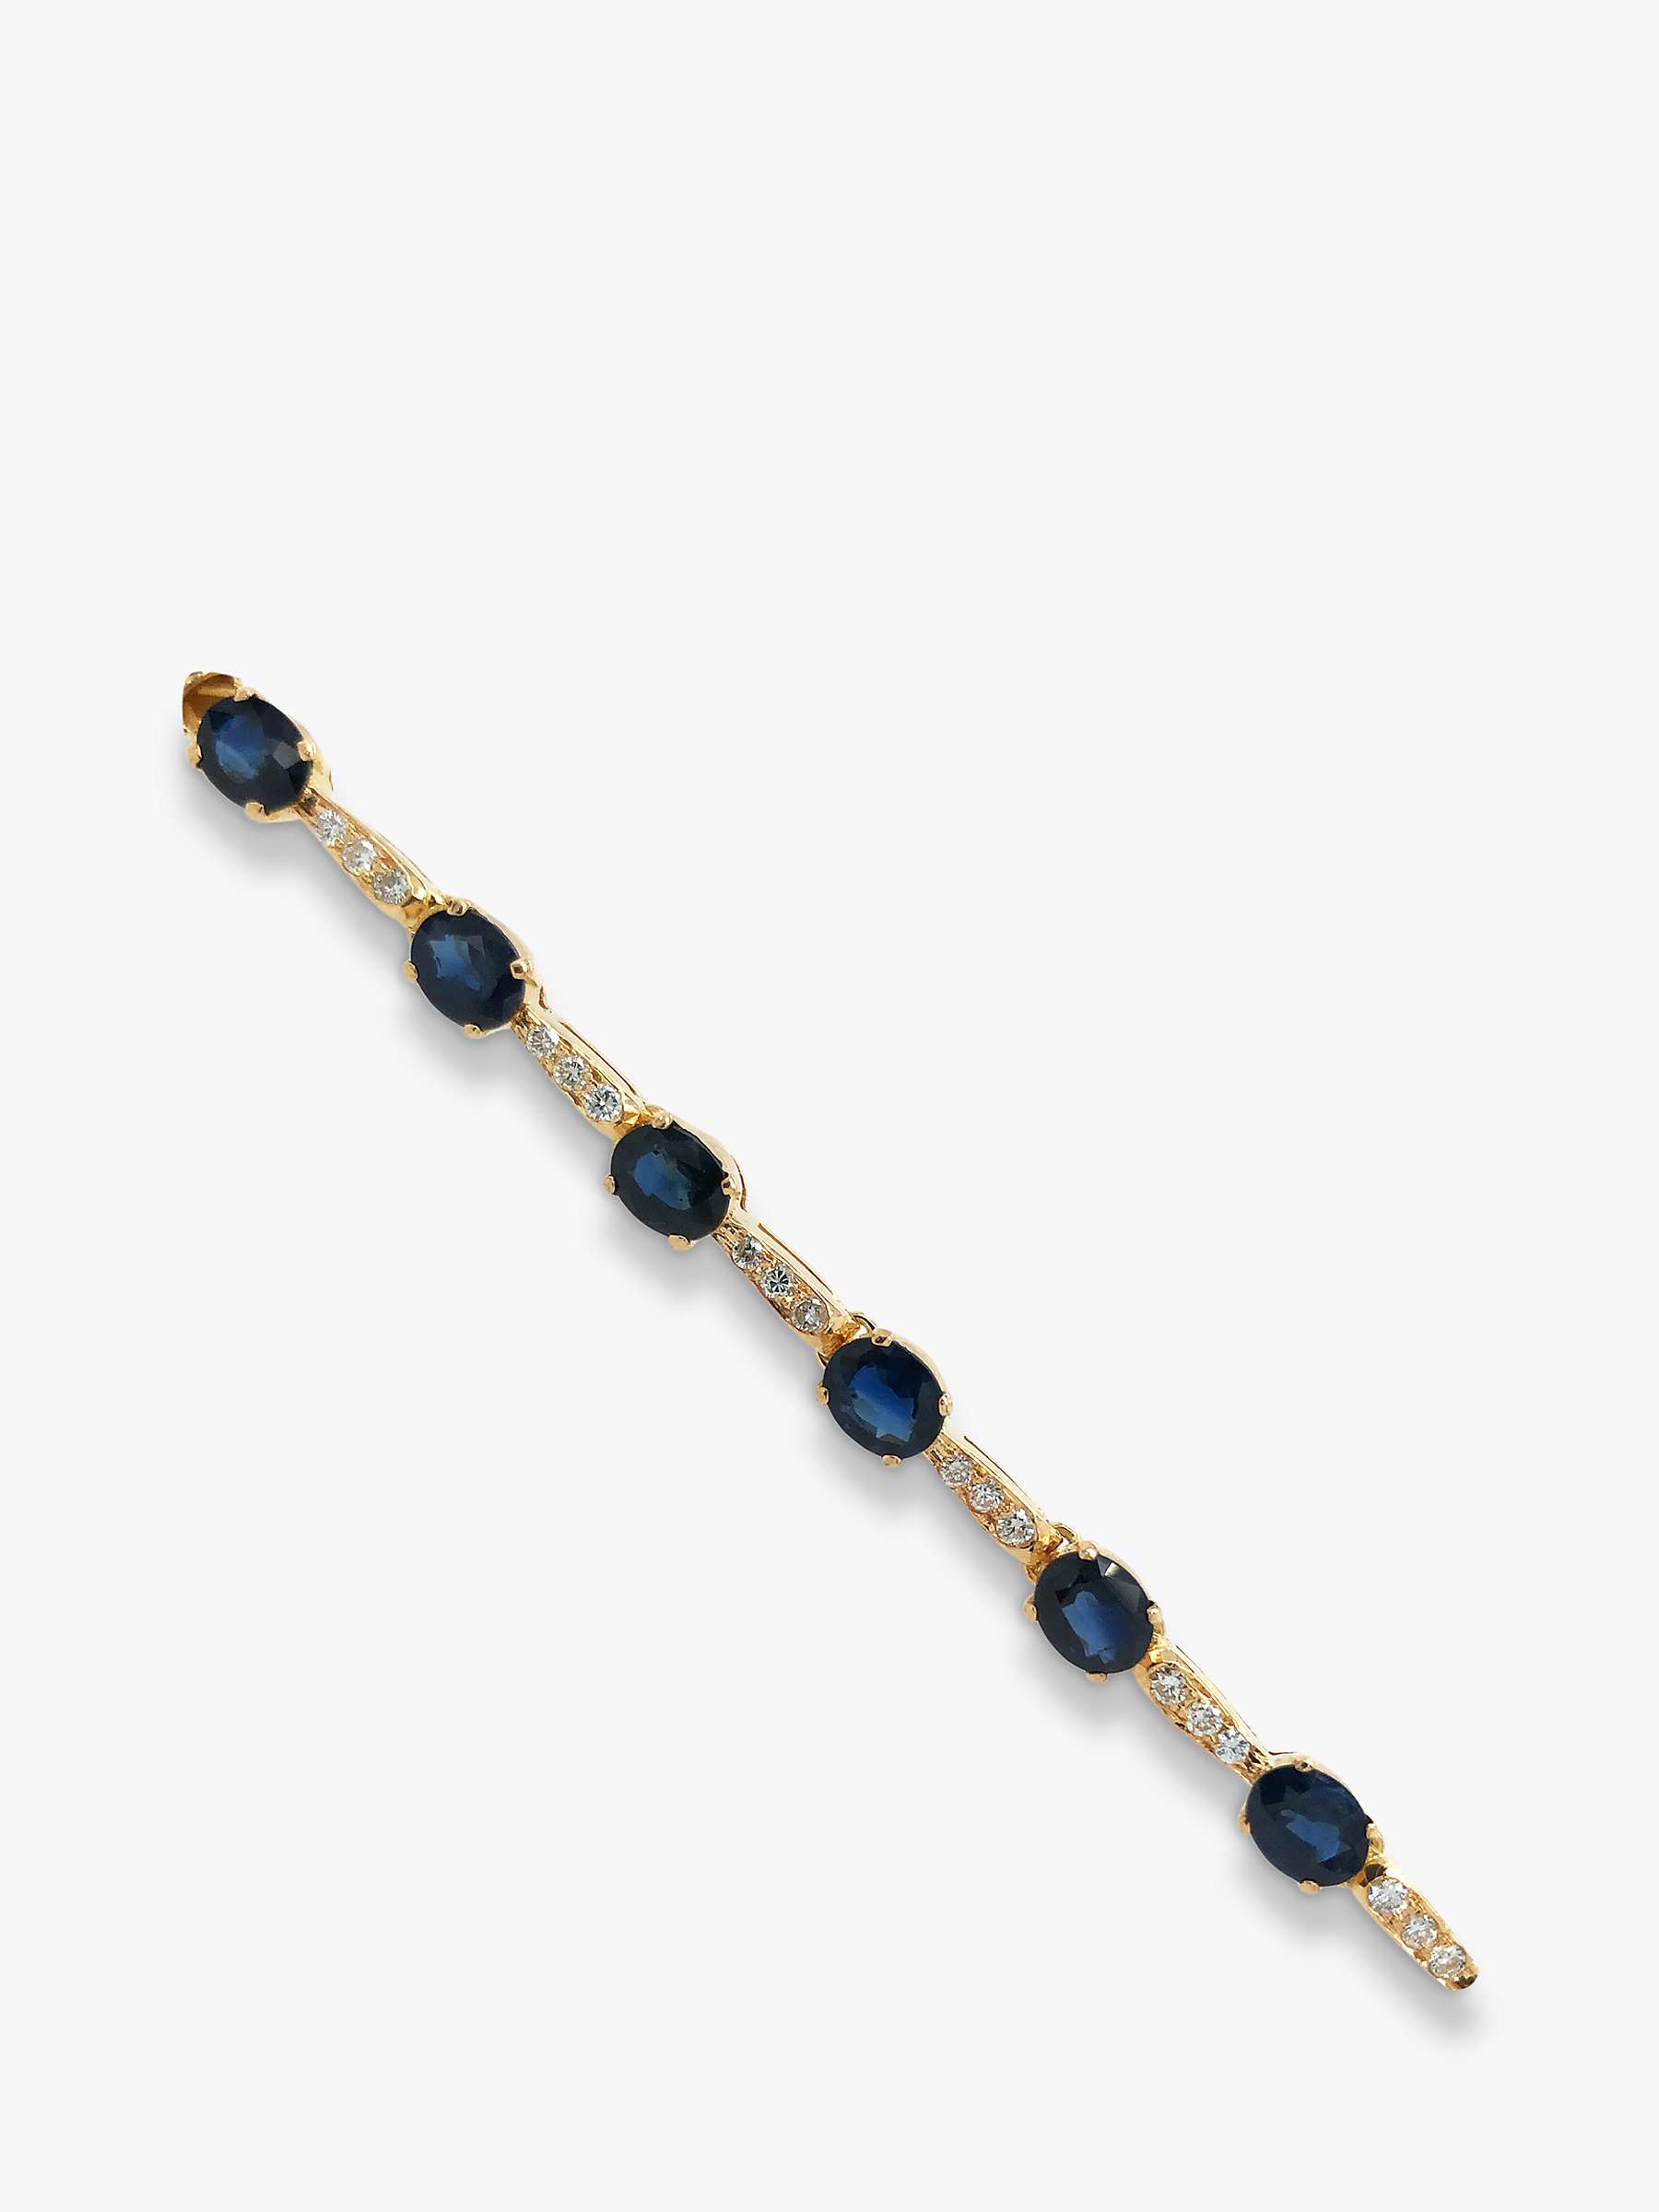 Buy VF Jewellery 18ct Yellow Gold Second Hand Diamond and Sapphire Bracelet Online at johnlewis.com